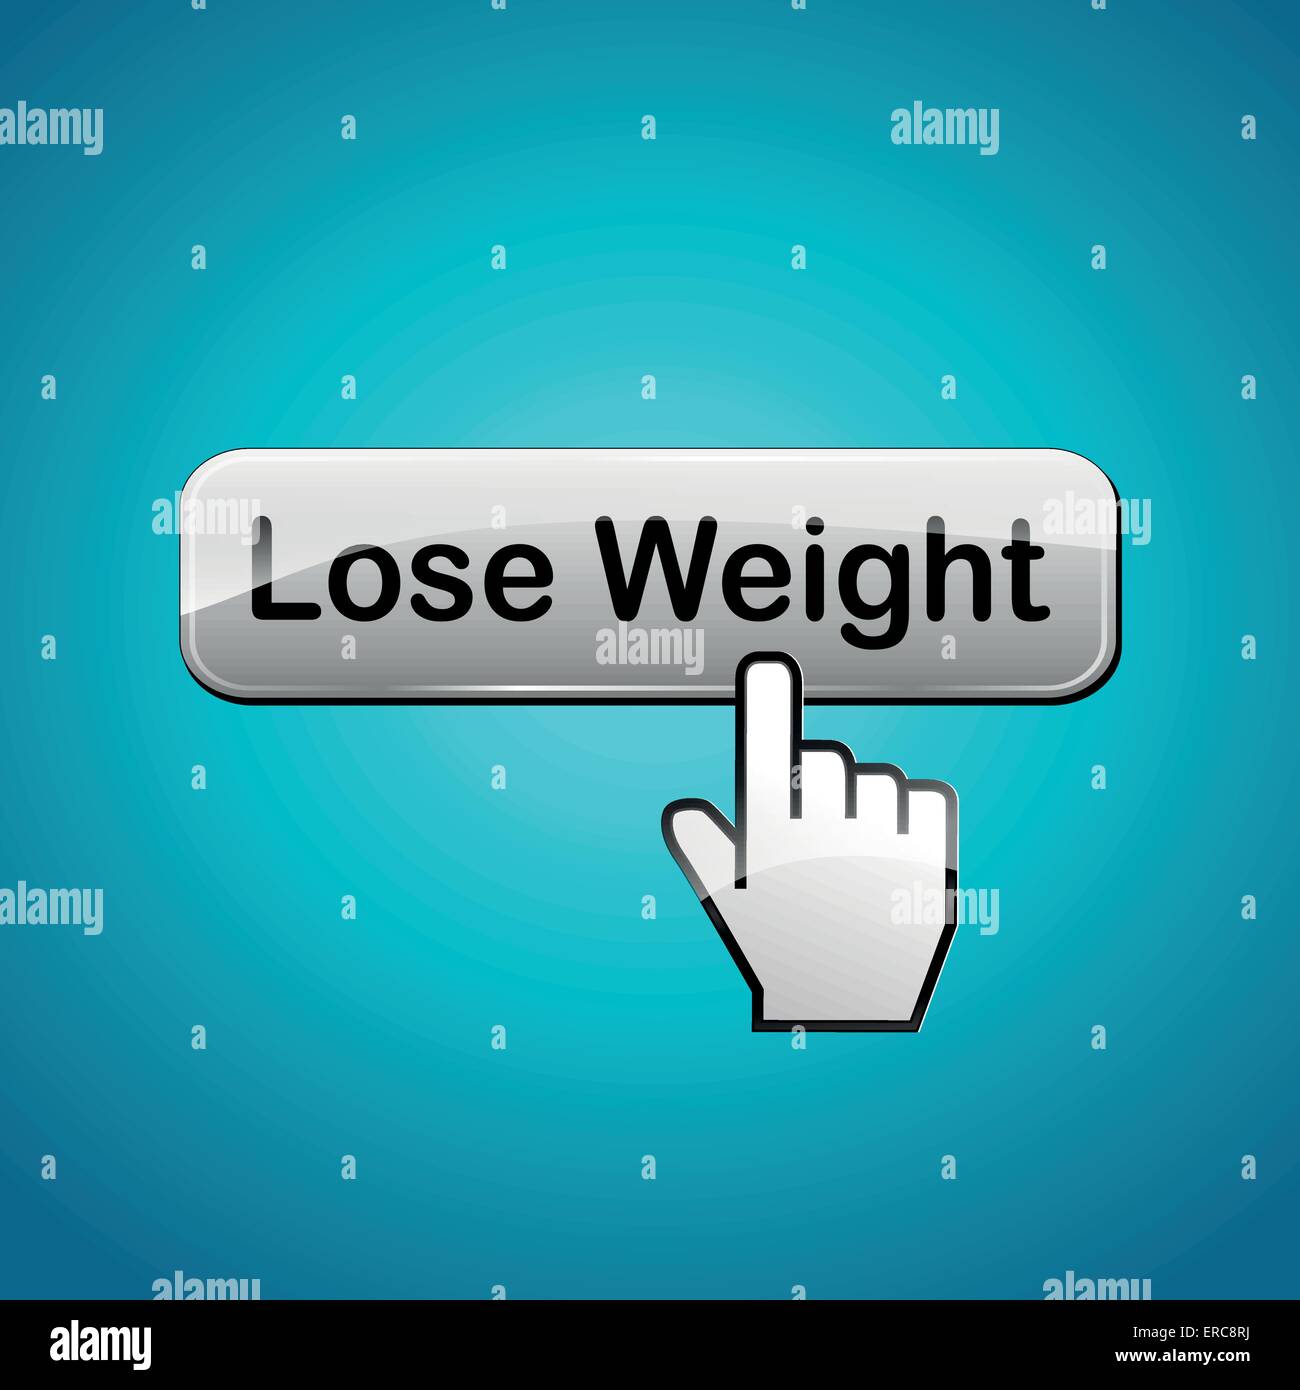 Vector illustration of lose weight abstract concept background Stock Vector